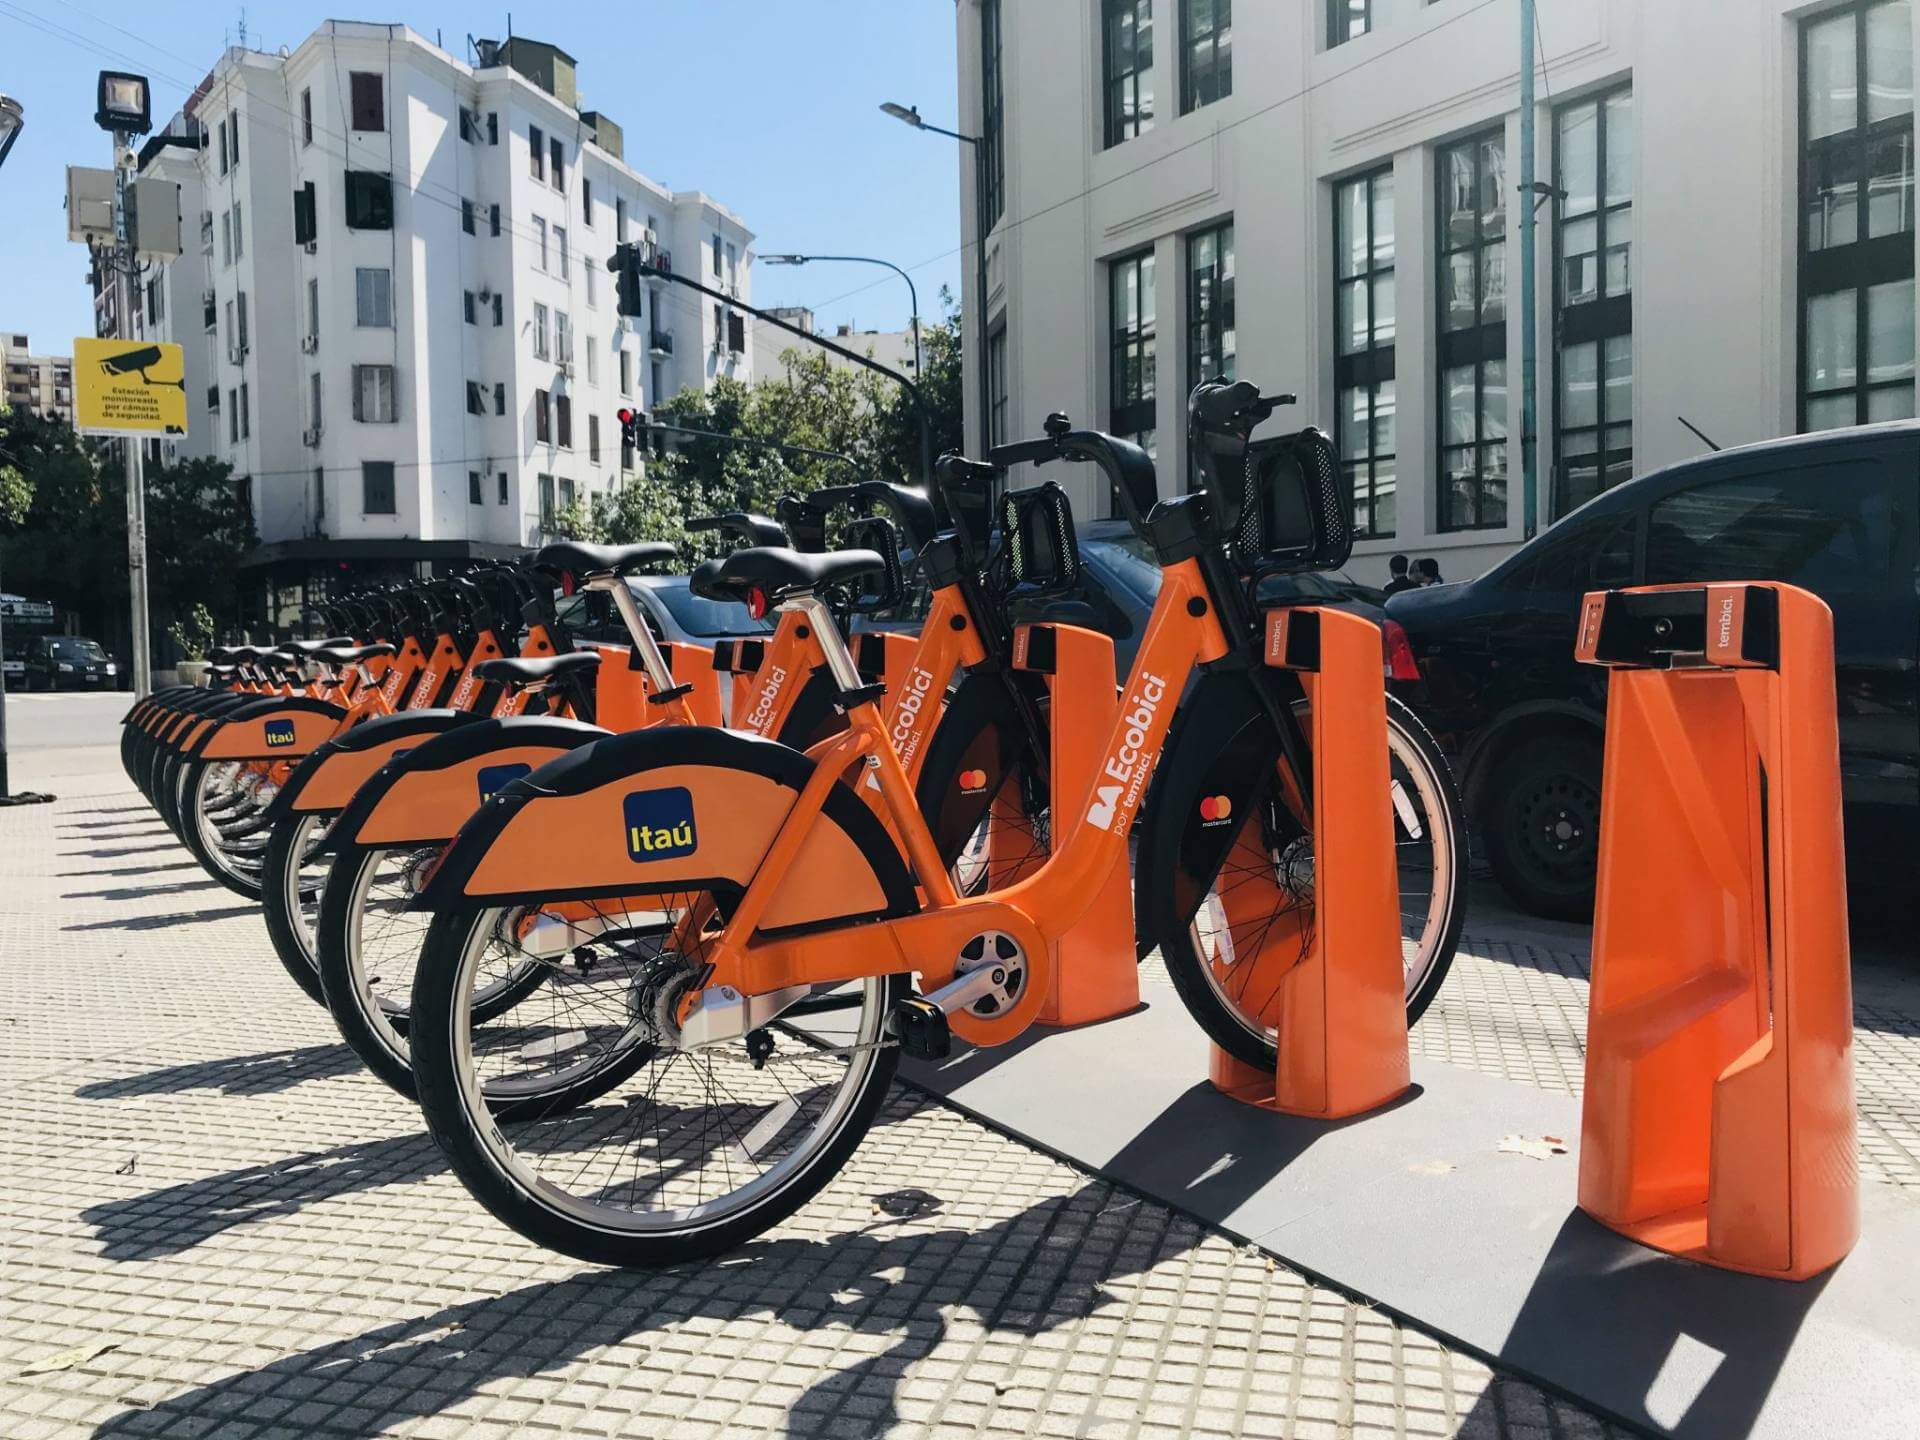 The orange Buenos Aires city bikes. Can tourists use them too?